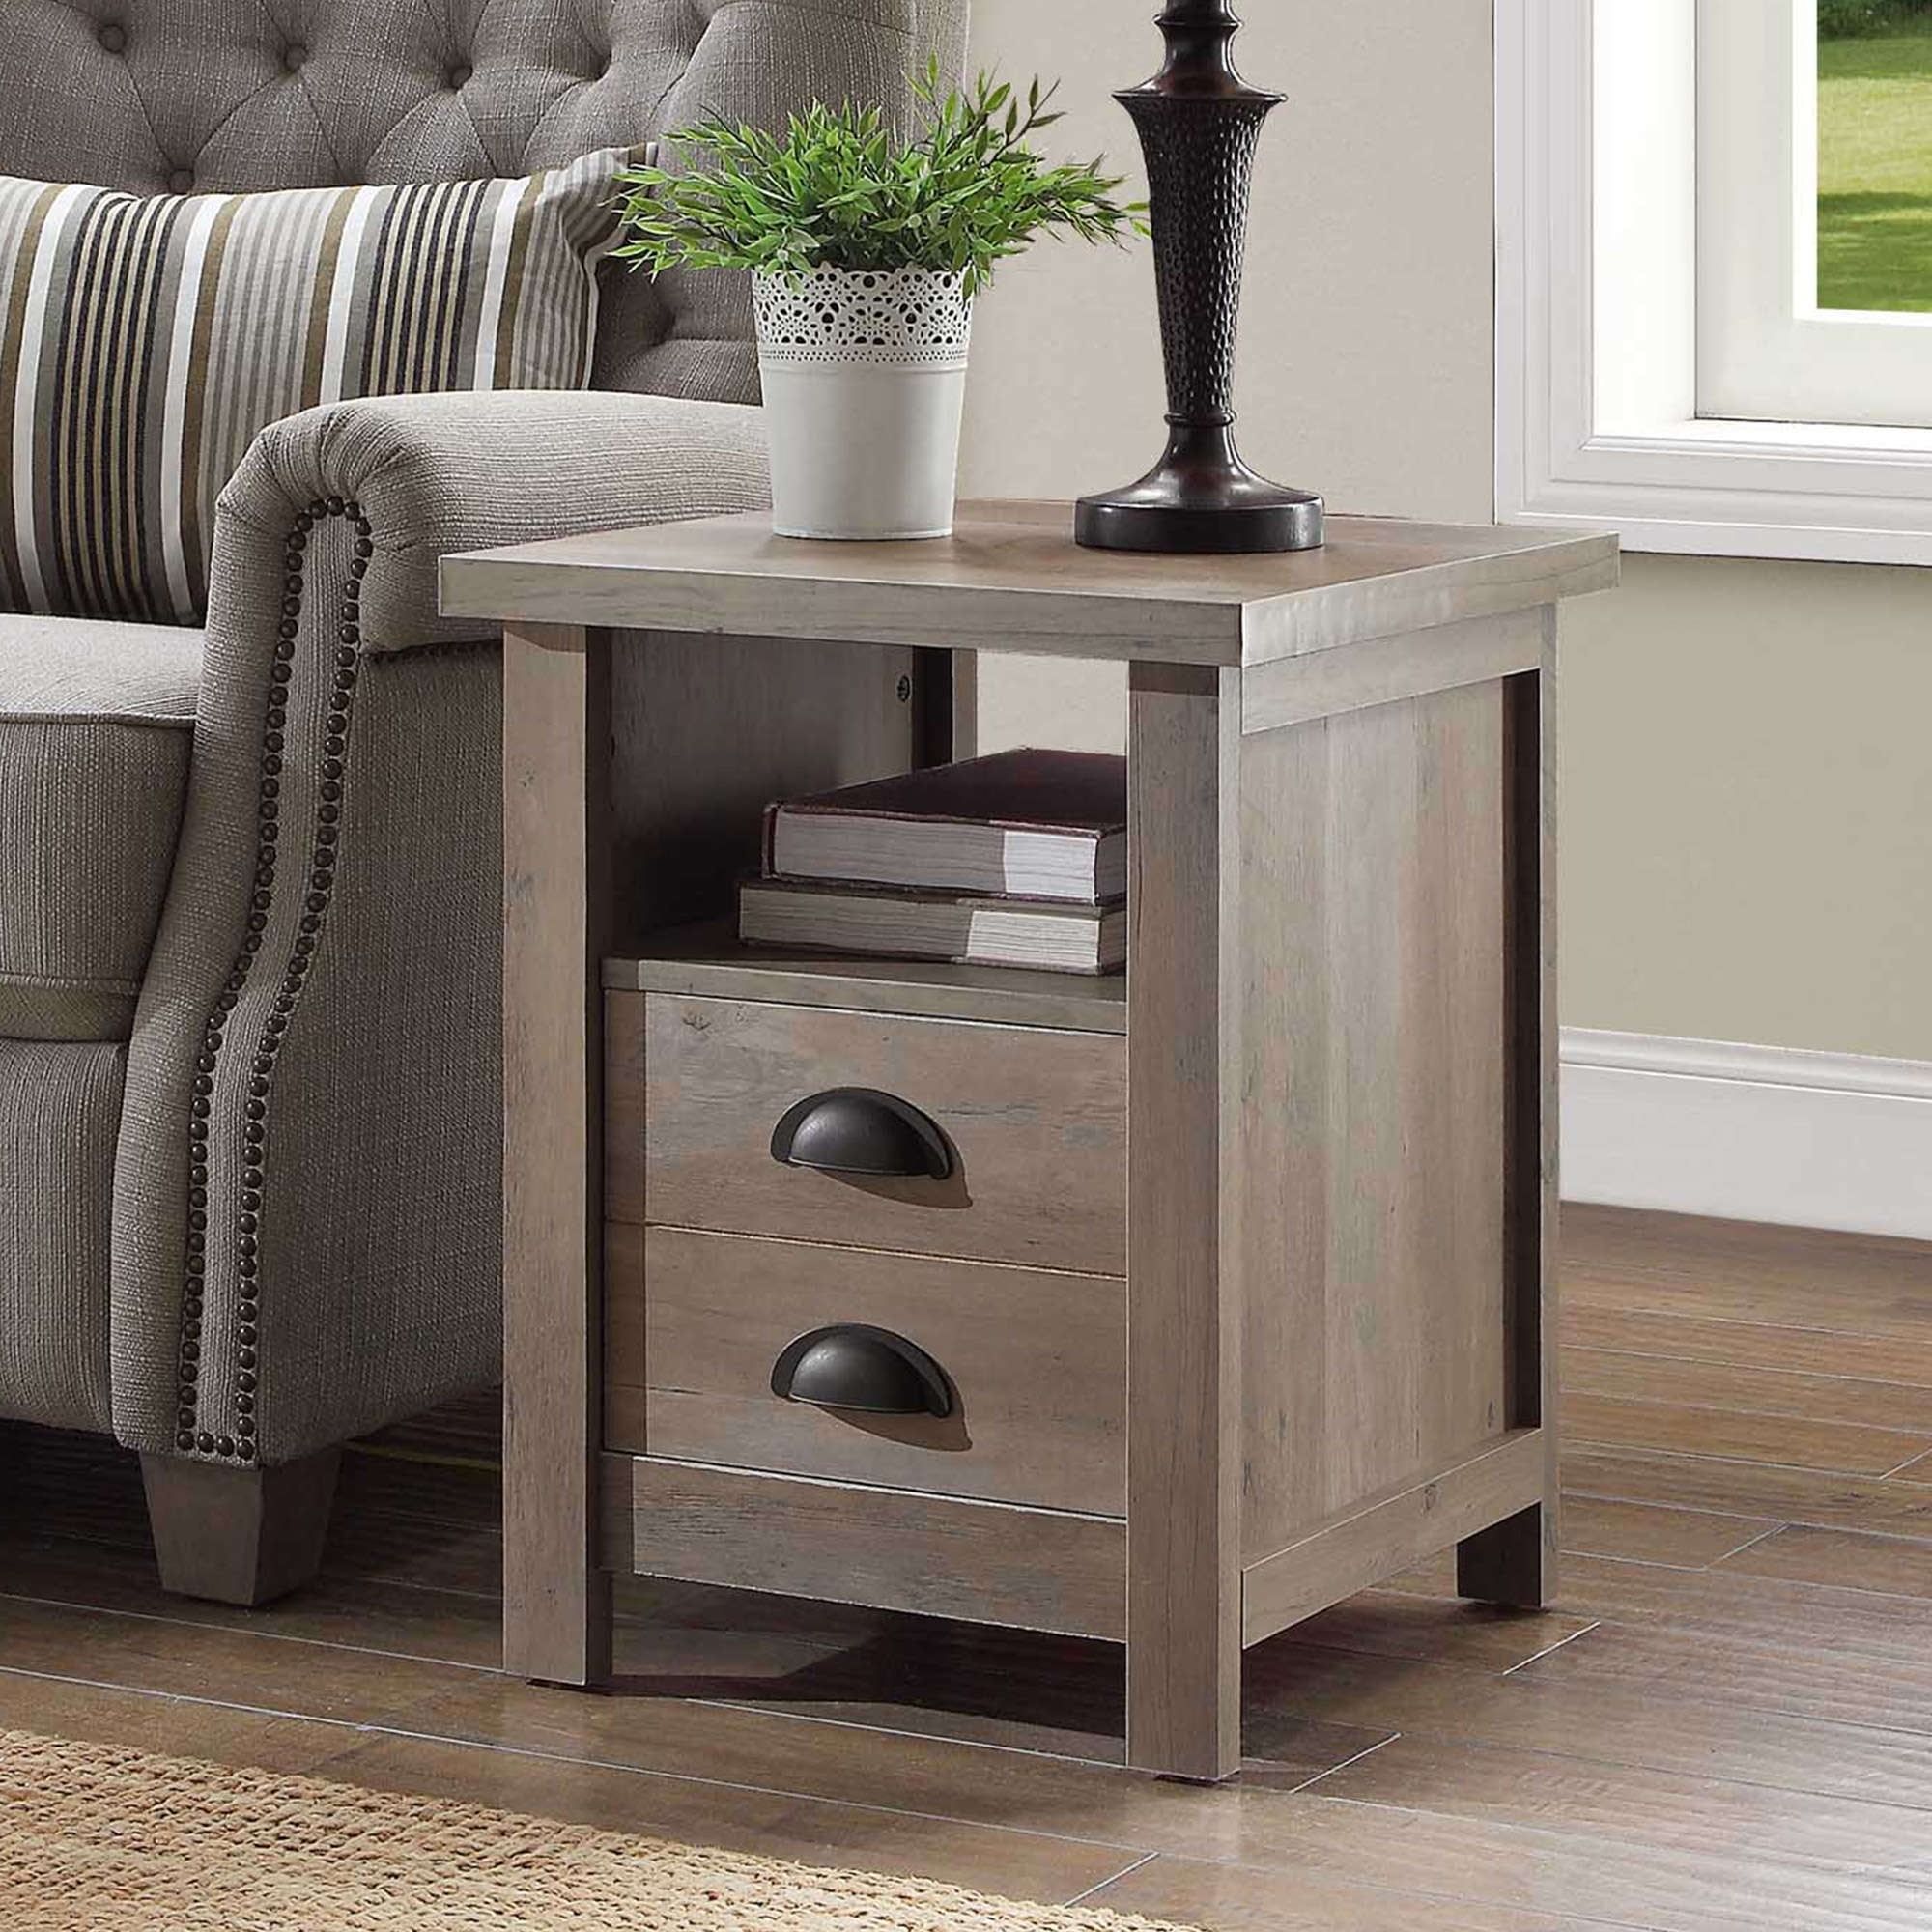 Homes And Gardens Granary Modern Farmhouse End Table Rustic Gray With Rustic Gray End Tables (View 5 of 20)